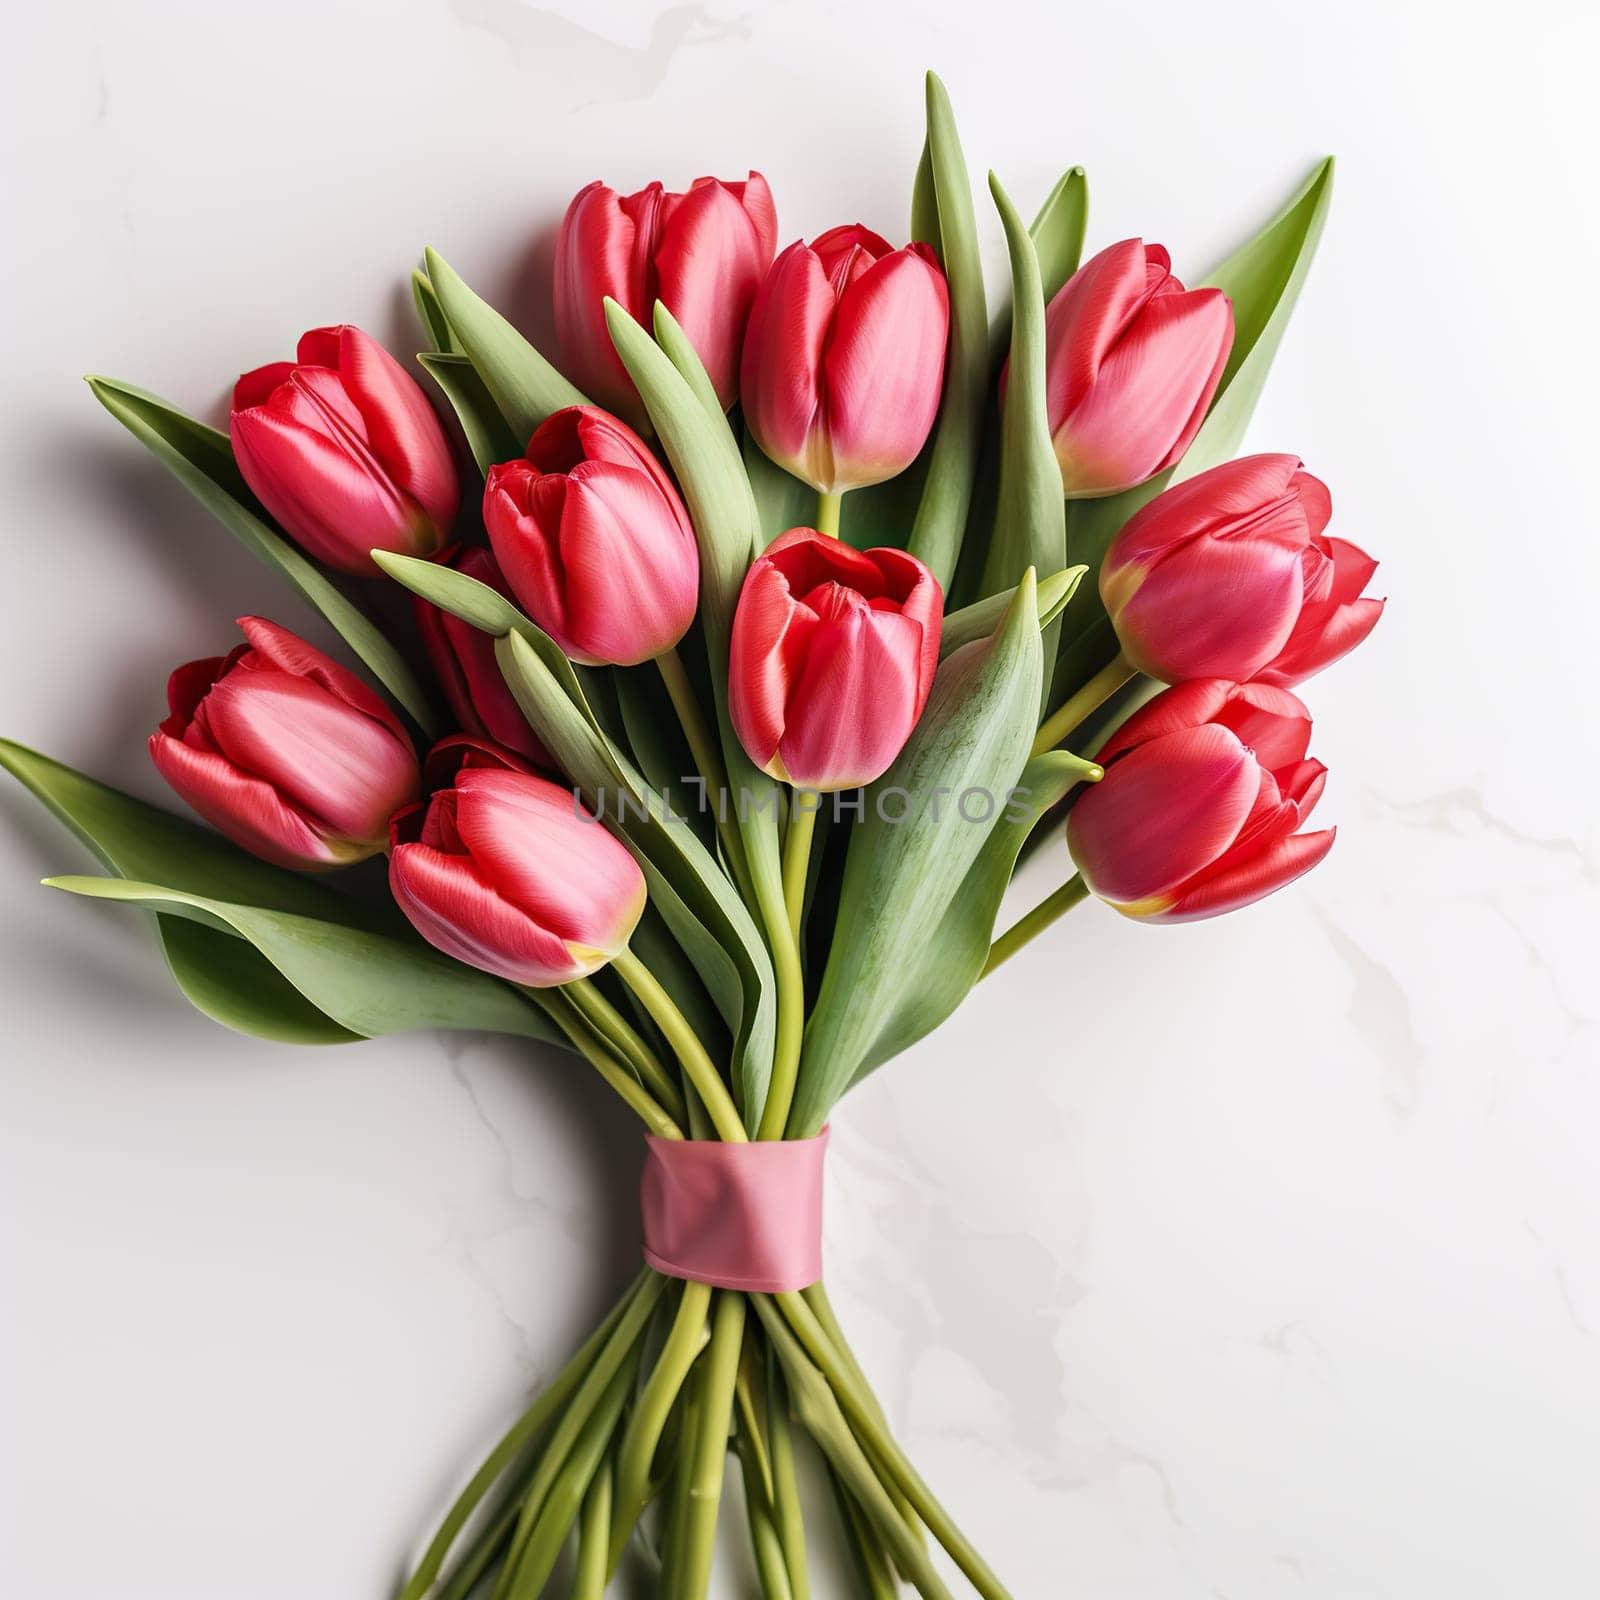 A bouquet of beautiful red tulips on a marble tabletop. Mother's Day, March 8, birthday. Generated by artificial intelligence by Vovmar